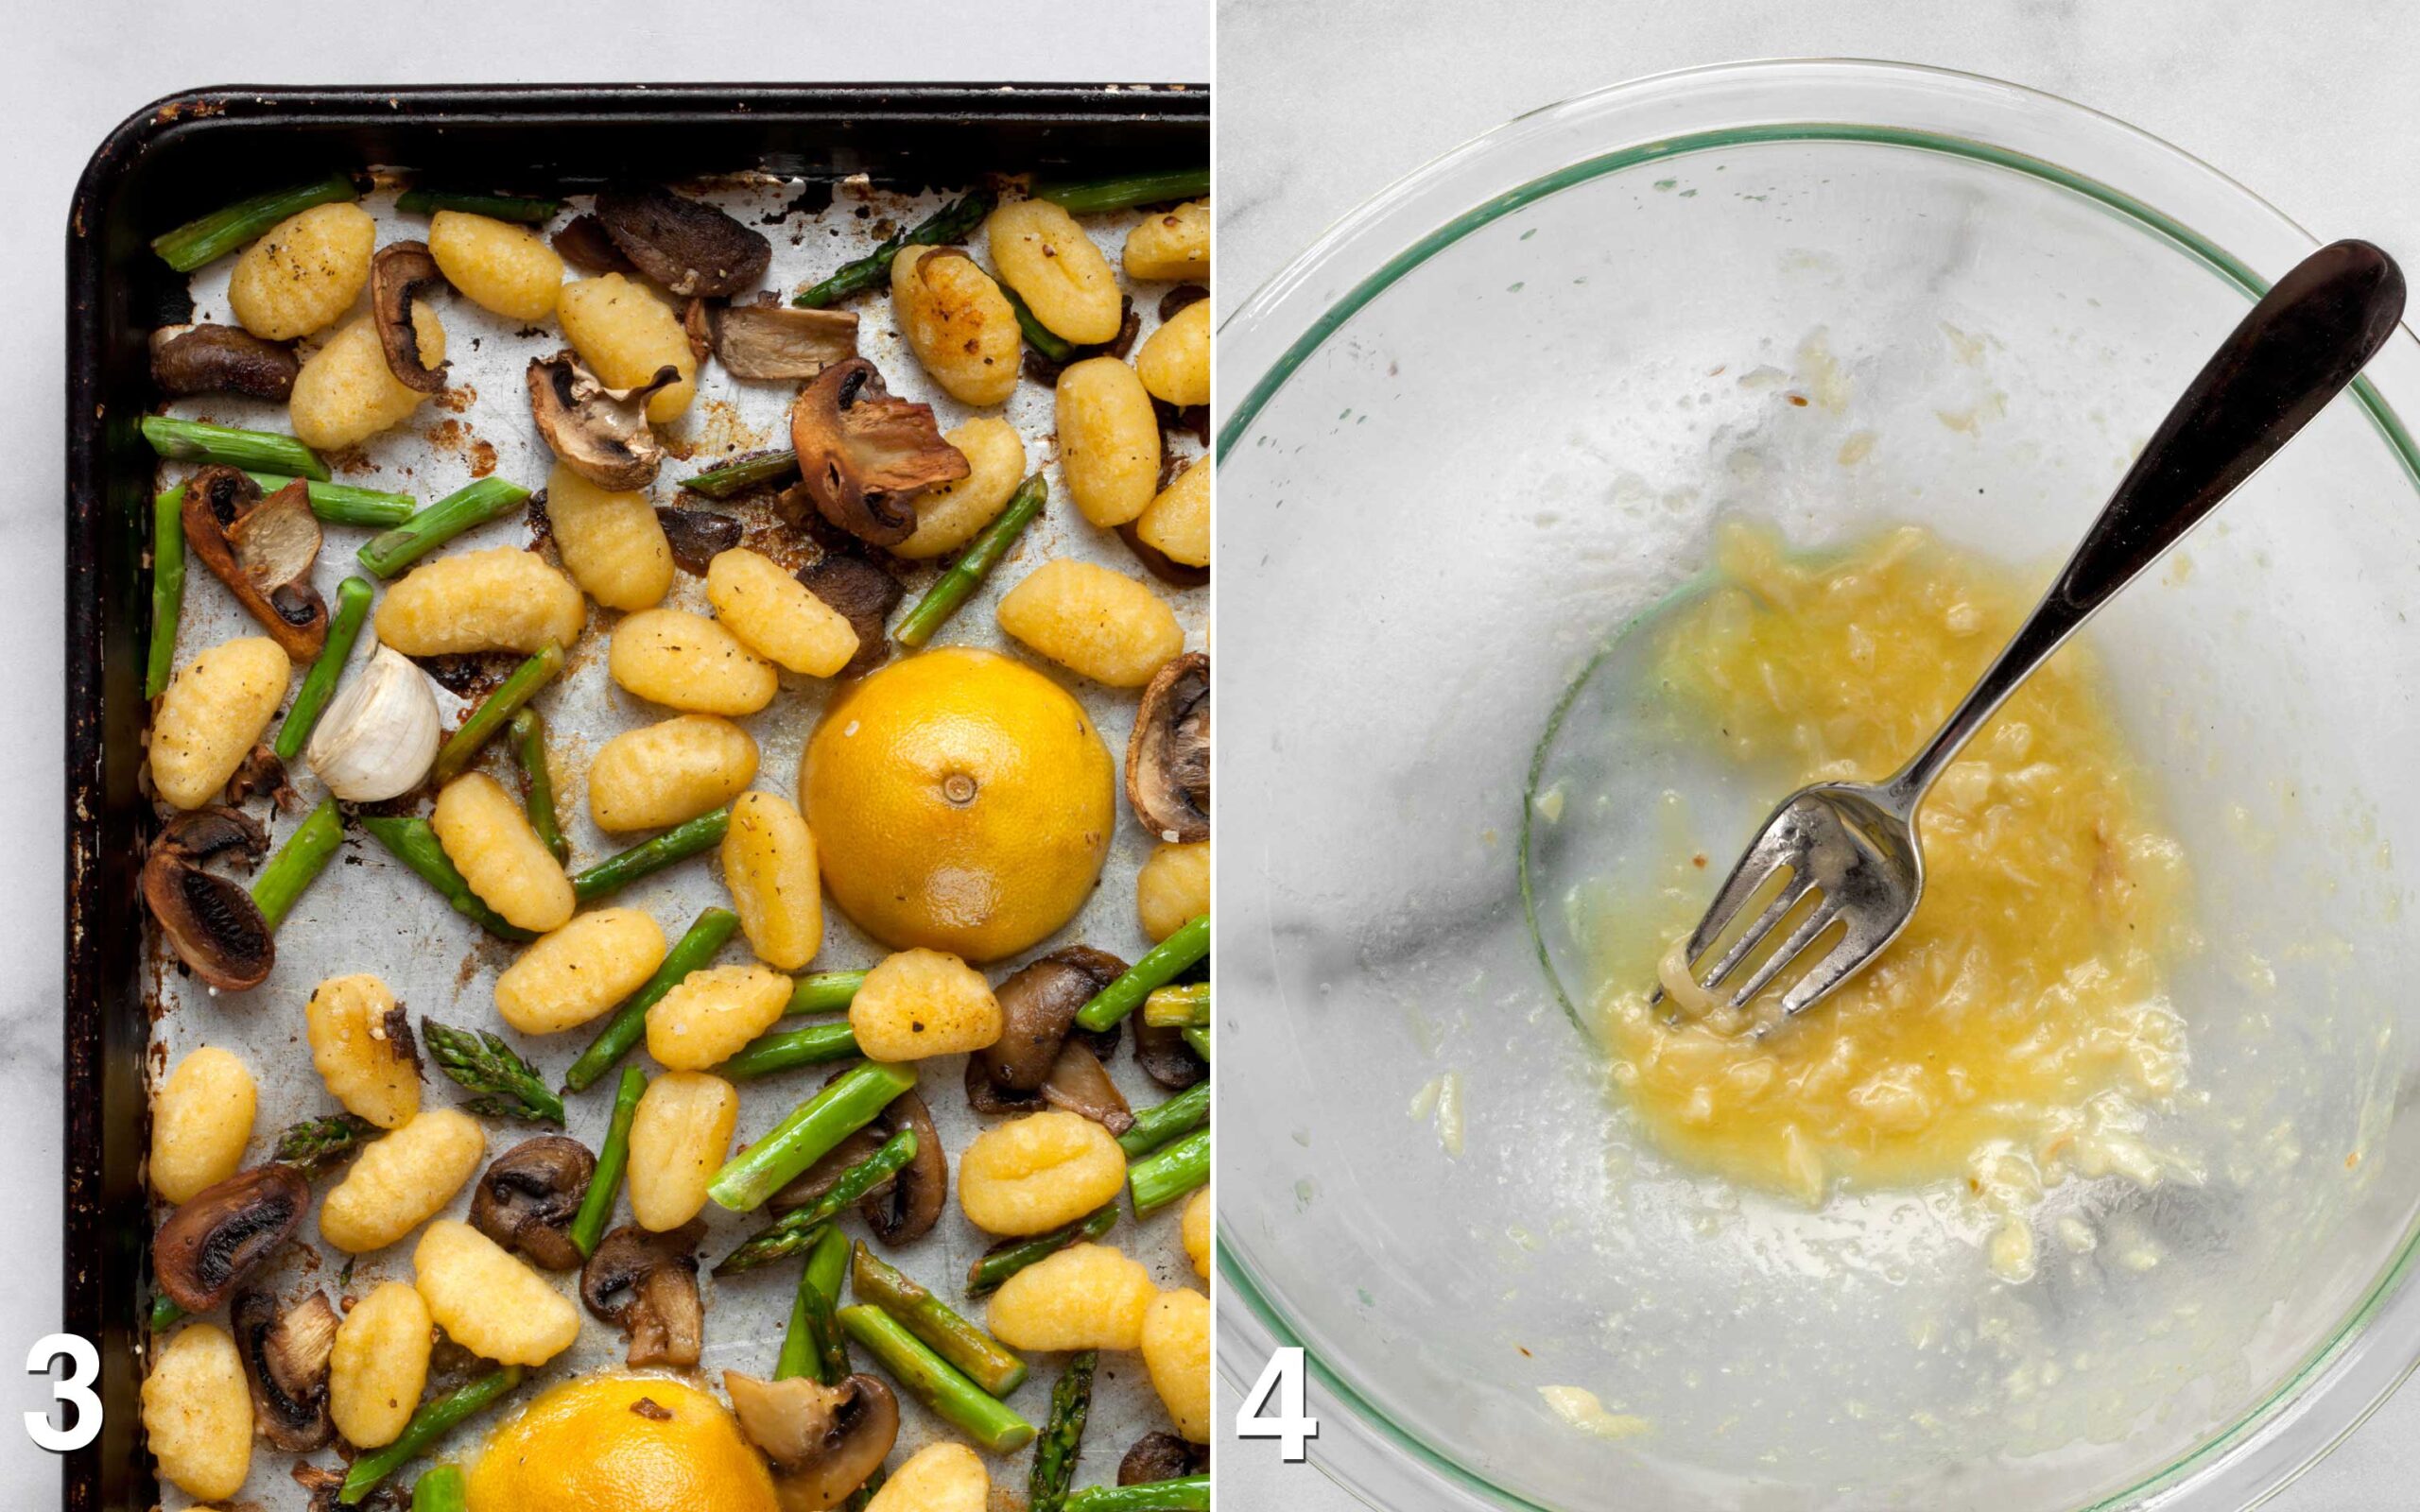 Roasted gnocchi, mushrooms and asparagus on a sheet pan. Garlic, lemon, olive oil mixture in a bowl.